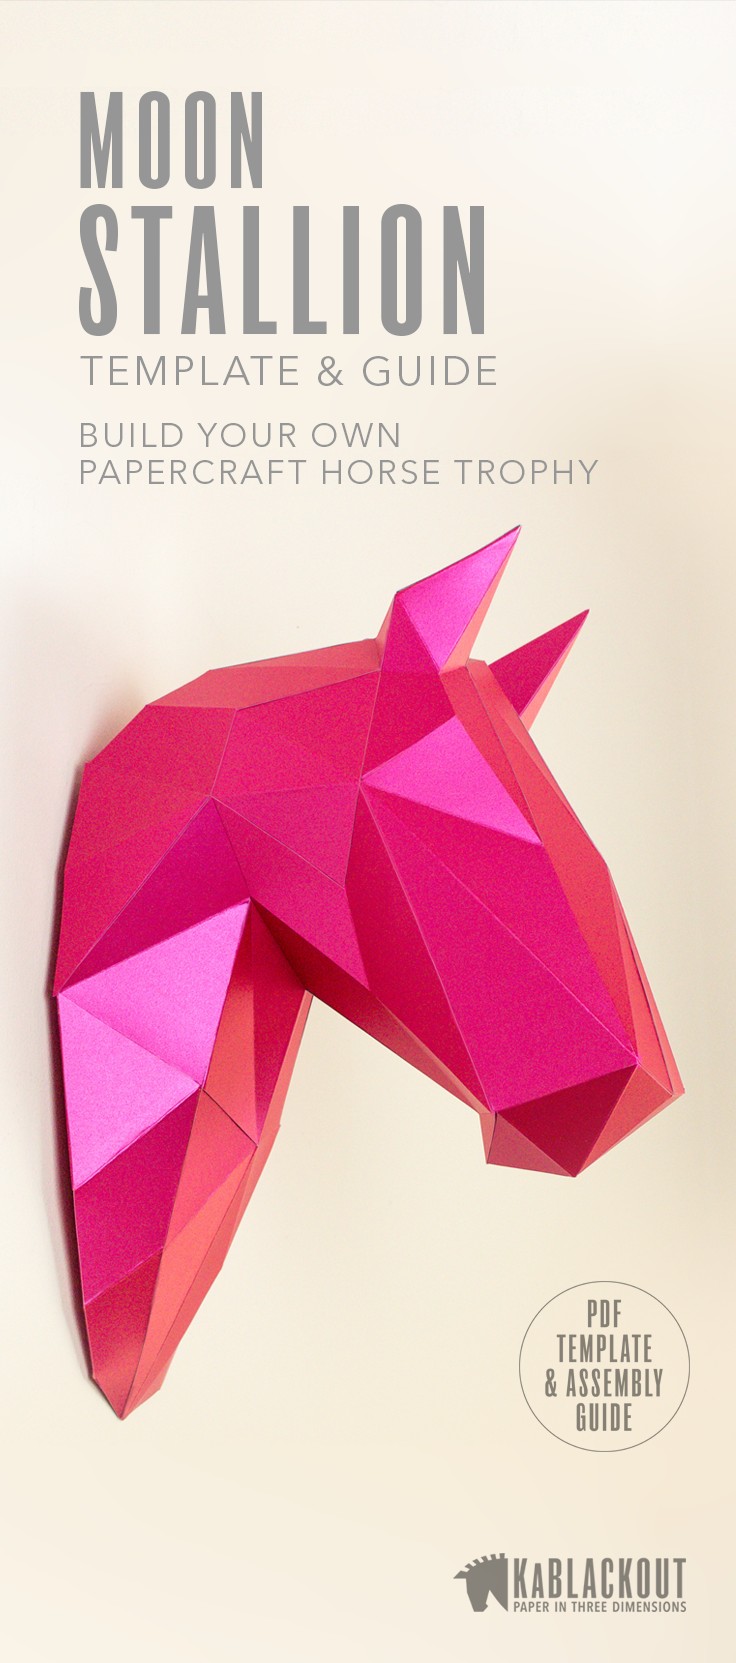 Create Your Own Papercraft Horse Papercraft Diy Horse Template Low Poly Horse 3d Wall Trophy